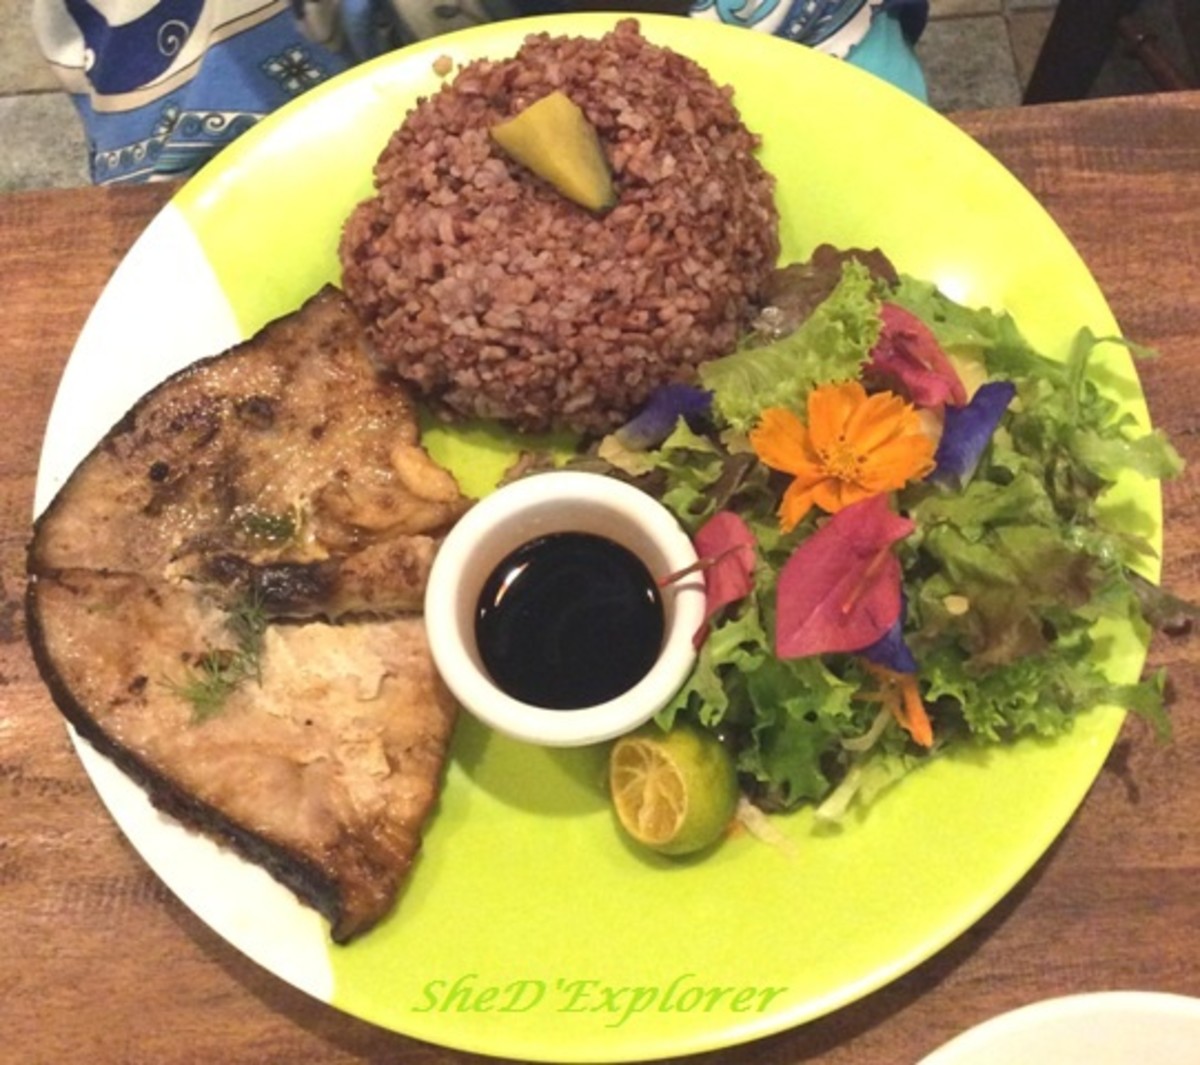 Bohol's homegrown Buzz Cafe & Bohol Bee Farm offer healthy mouthwatering meals.